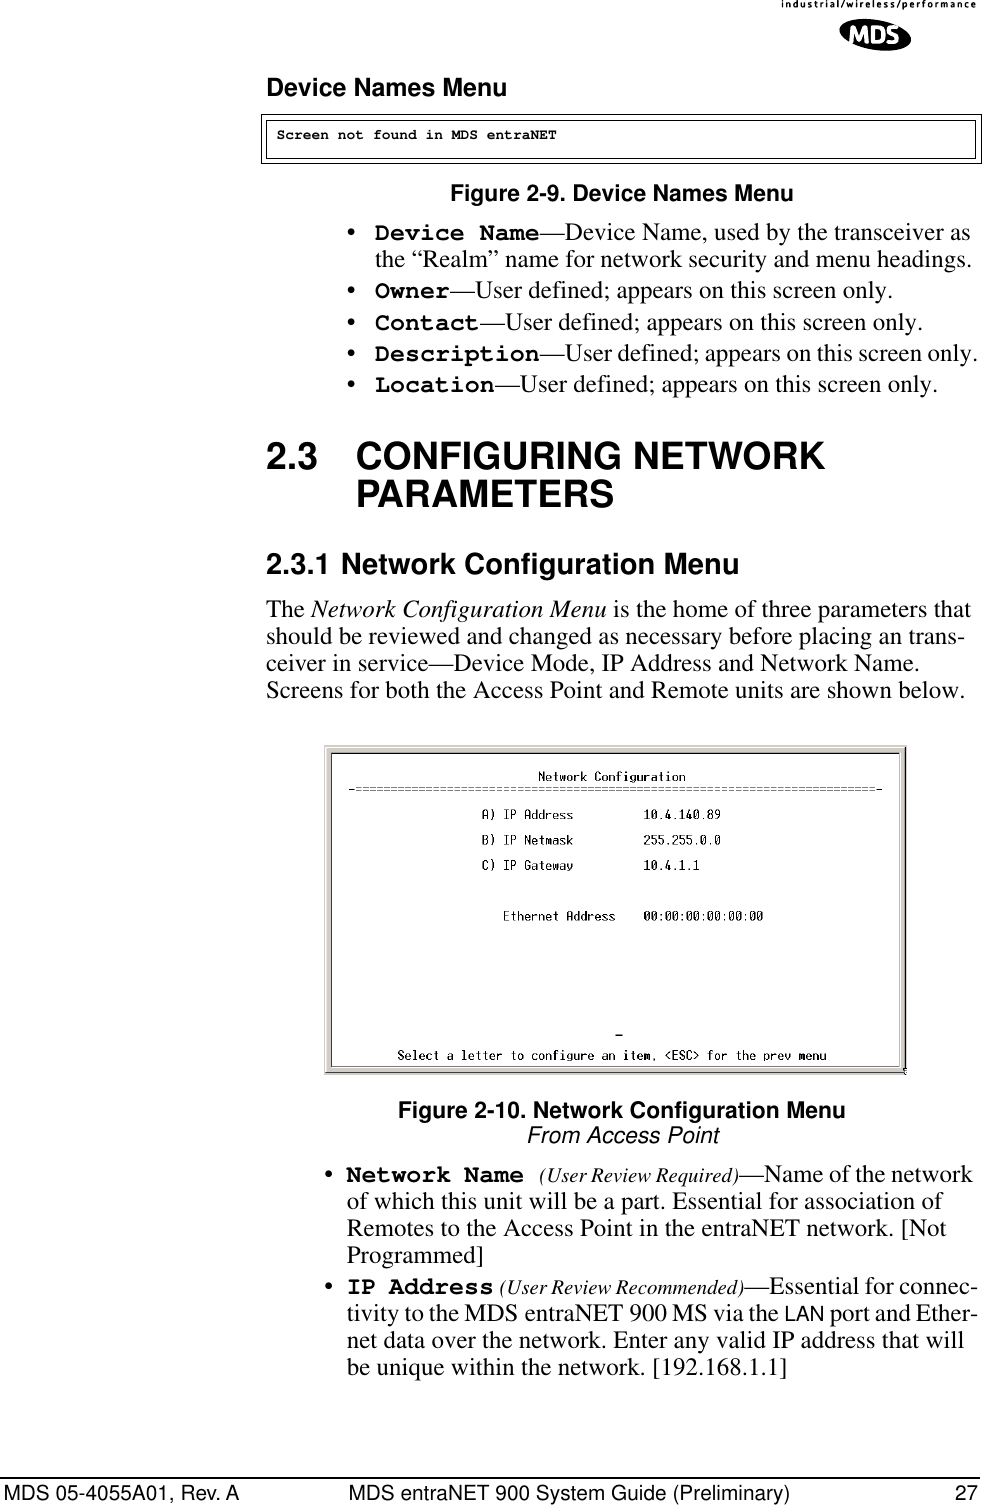 MDS 05-4055A01, Rev. A MDS entraNET 900 System Guide (Preliminary) 27Device Names MenuFigure 2-9. Device Names Menu•Device Name—Device Name, used by the transceiver as the “Realm” name for network security and menu headings. •Owner—User defined; appears on this screen only.•Contact—User defined; appears on this screen only.•Description—User defined; appears on this screen only.•Location—User defined; appears on this screen only.2.3 CONFIGURING NETWORK PARAMETERS2.3.1 Network Configuration MenuThe Network Configuration Menu is the home of three parameters that should be reviewed and changed as necessary before placing an trans-ceiver in service—Device Mode, IP Address and Network Name. Screens for both the Access Point and Remote units are shown below.Invisible place holderFigure 2-10. Network Configuration MenuFrom Access Point•Network Name (User Review Required)—Name of the network of which this unit will be a part. Essential for association of Remotes to the Access Point in the entraNET network. [Not Programmed]•IP Address (User Review Recommended)—Essential for connec-tivity to the MDS entraNET 900 MS via the LAN port and Ether-net data over the network. Enter any valid IP address that will be unique within the network. [192.168.1.1]Screen not found in MDS entraNET